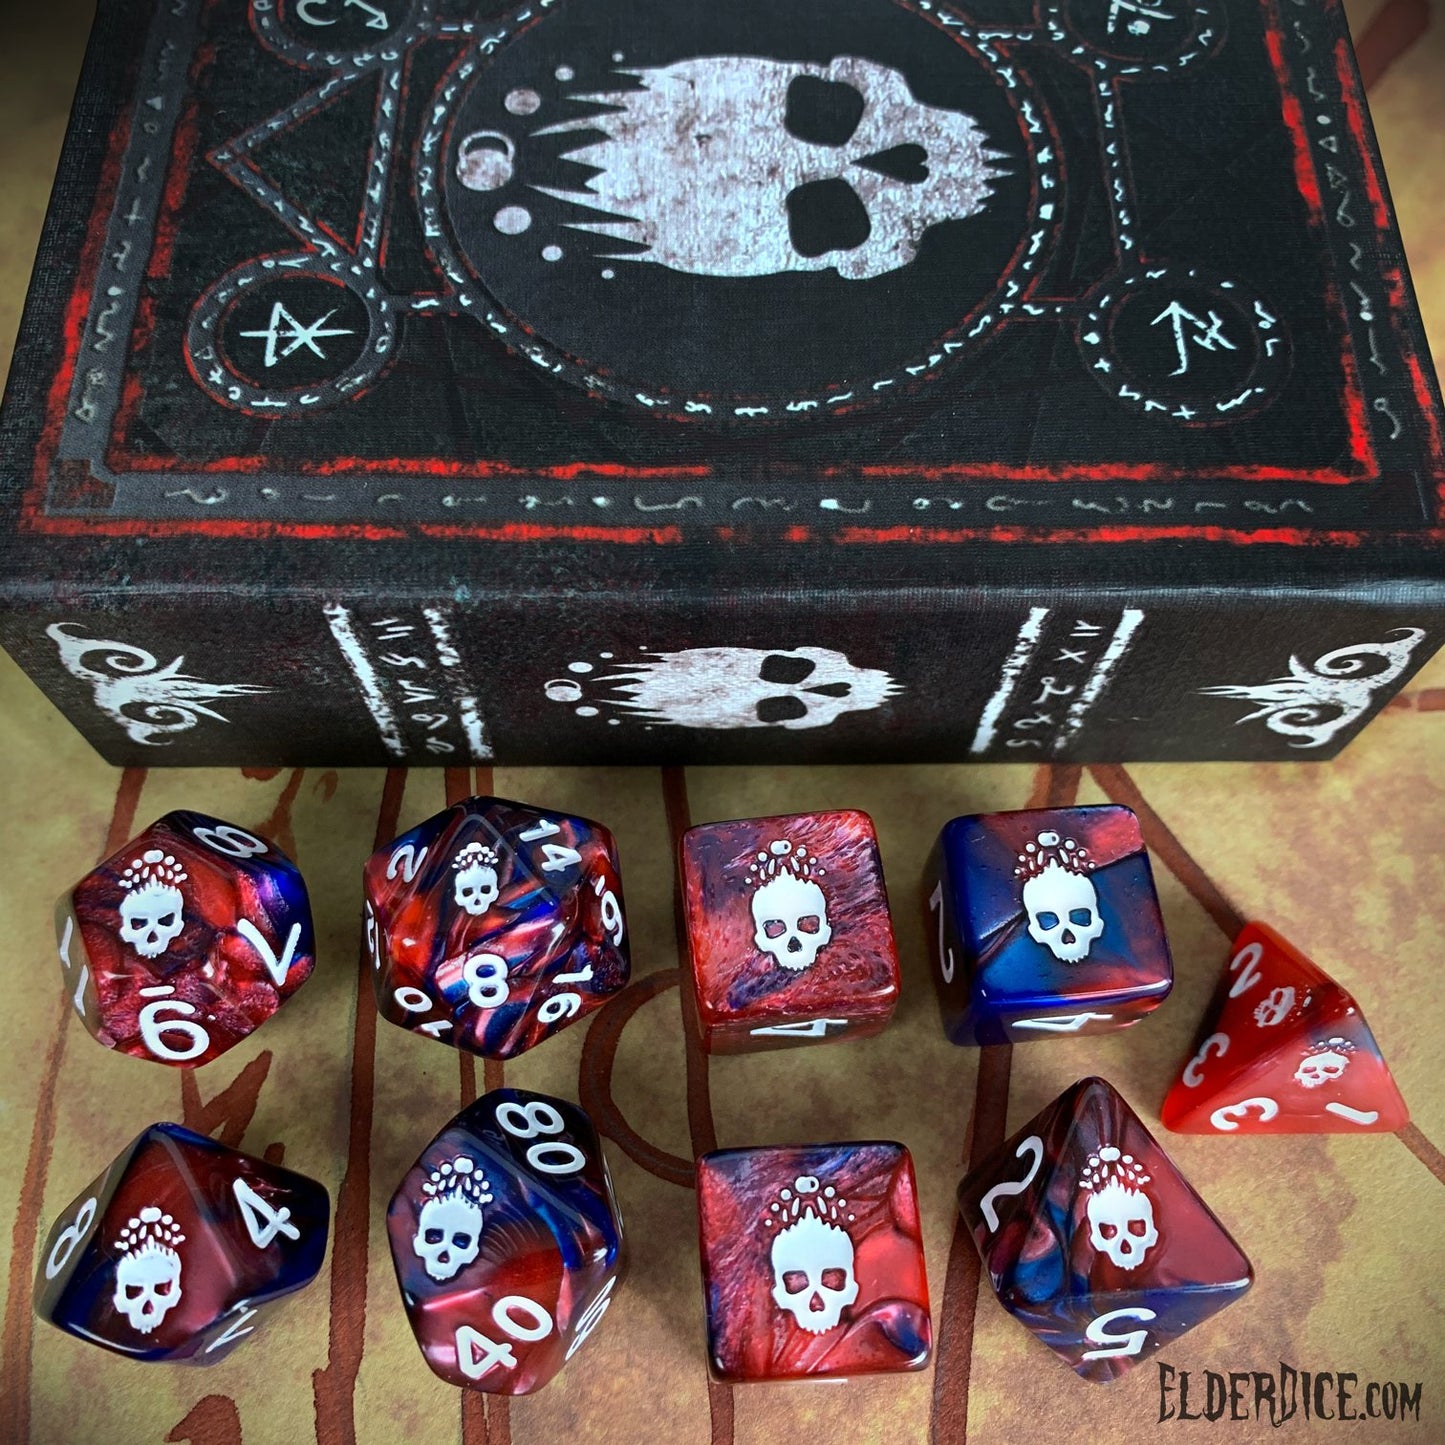 Elder Dice - Mark of the Necronomicon Dice - Bone White on Blood and Magick Polyhedral Set